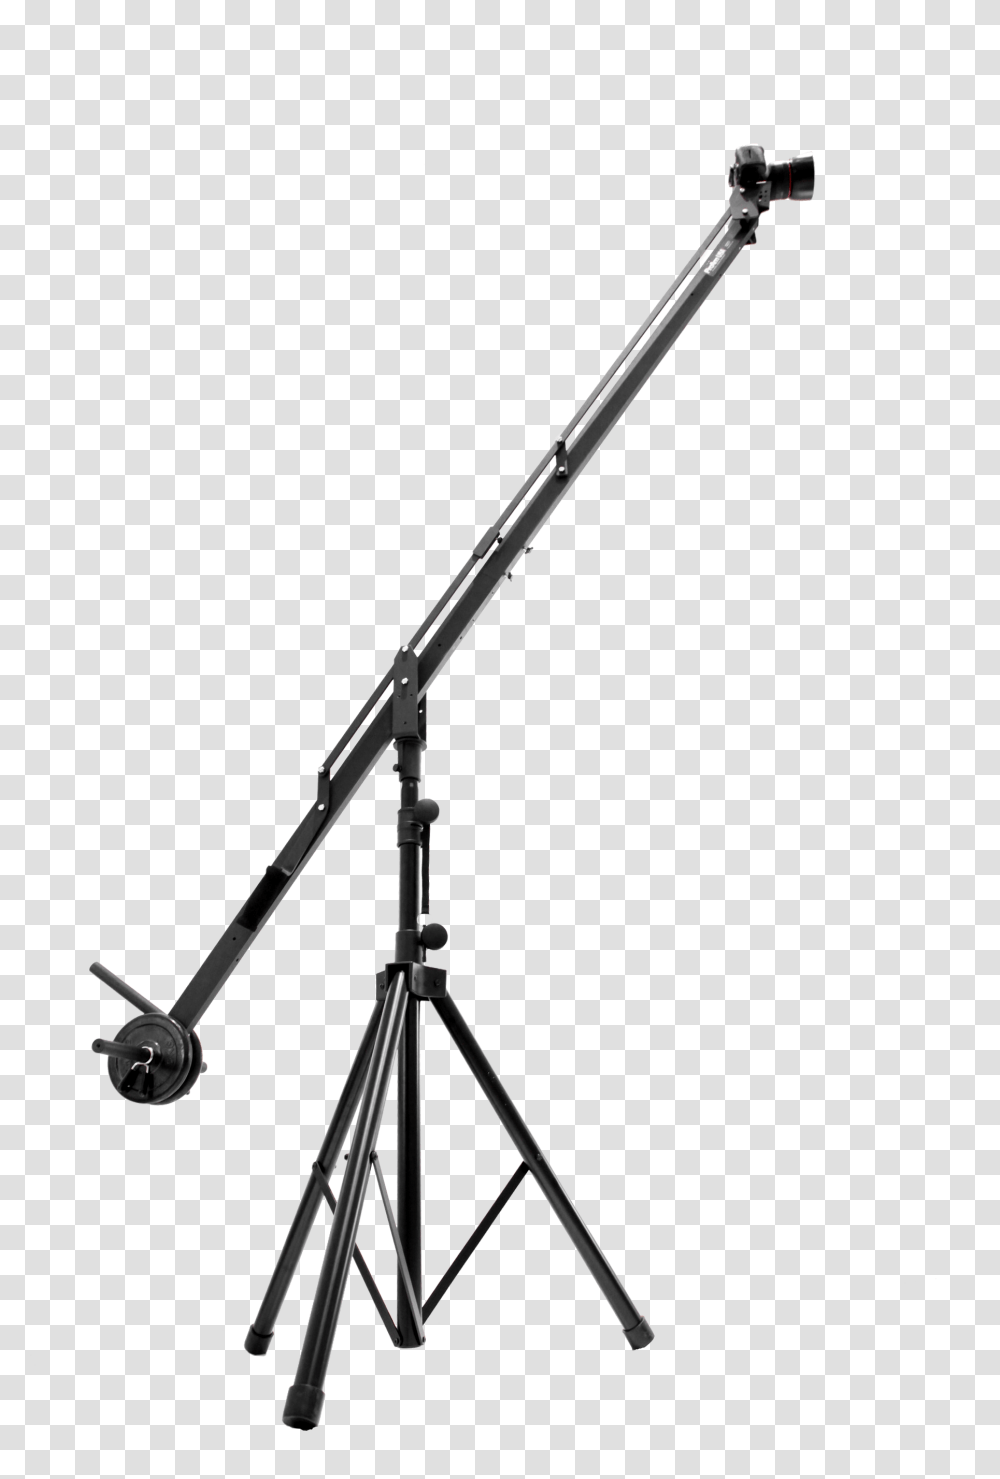 Microphone Stands Tripod Line Tripod, Bow, Sword, Blade, Weapon Transparent Png